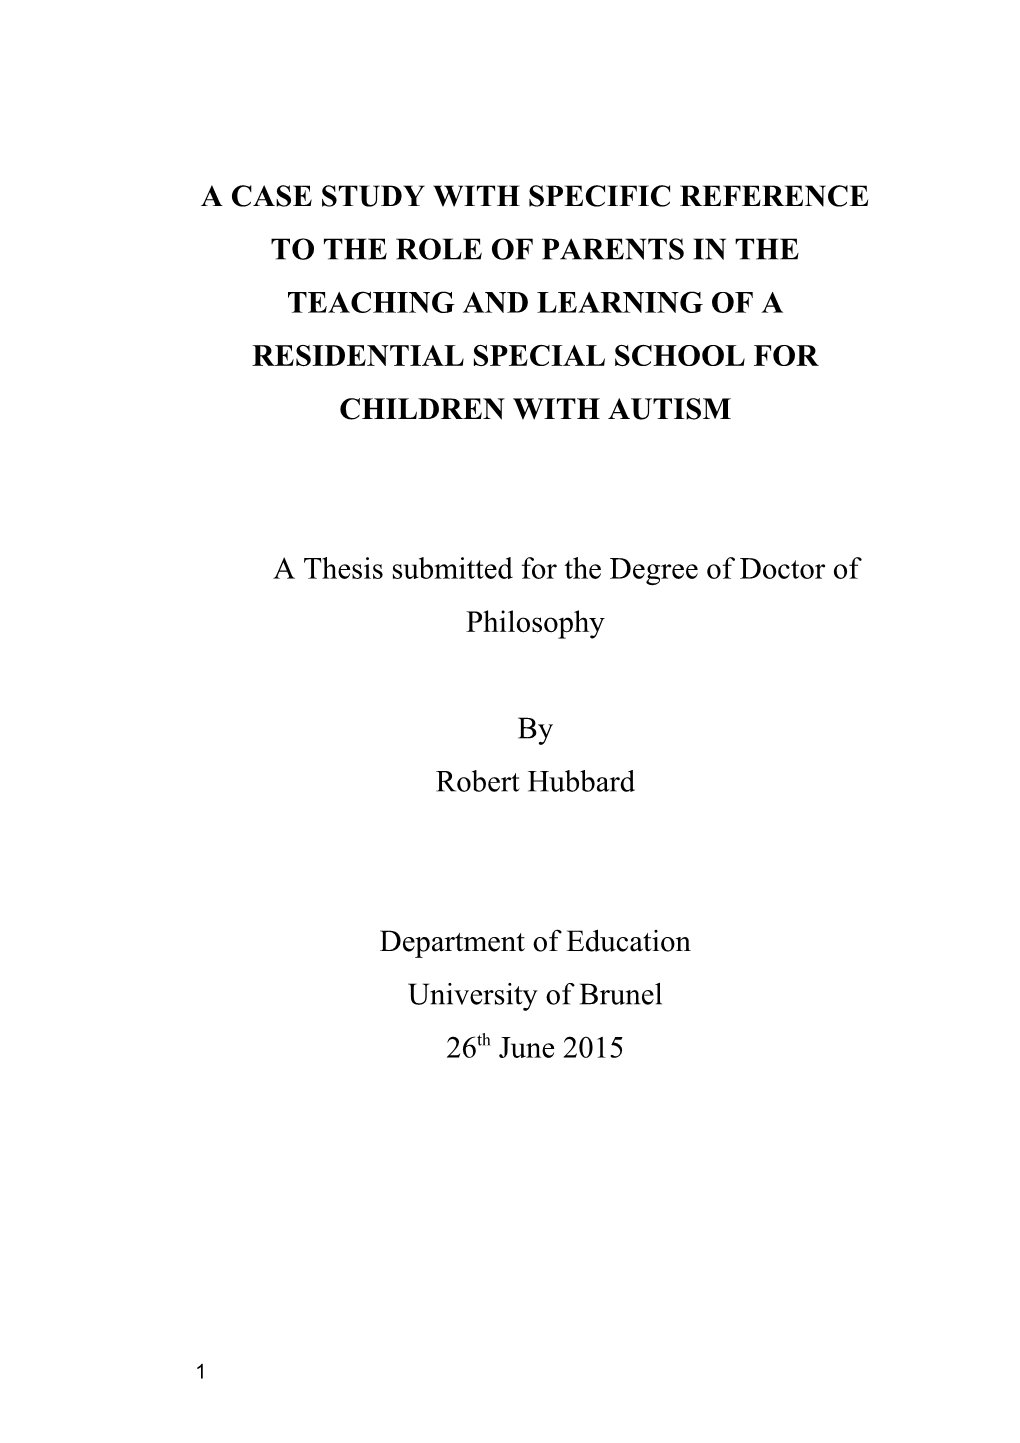 A Thesis Submitted for the Degree of Doctor of Philosophy